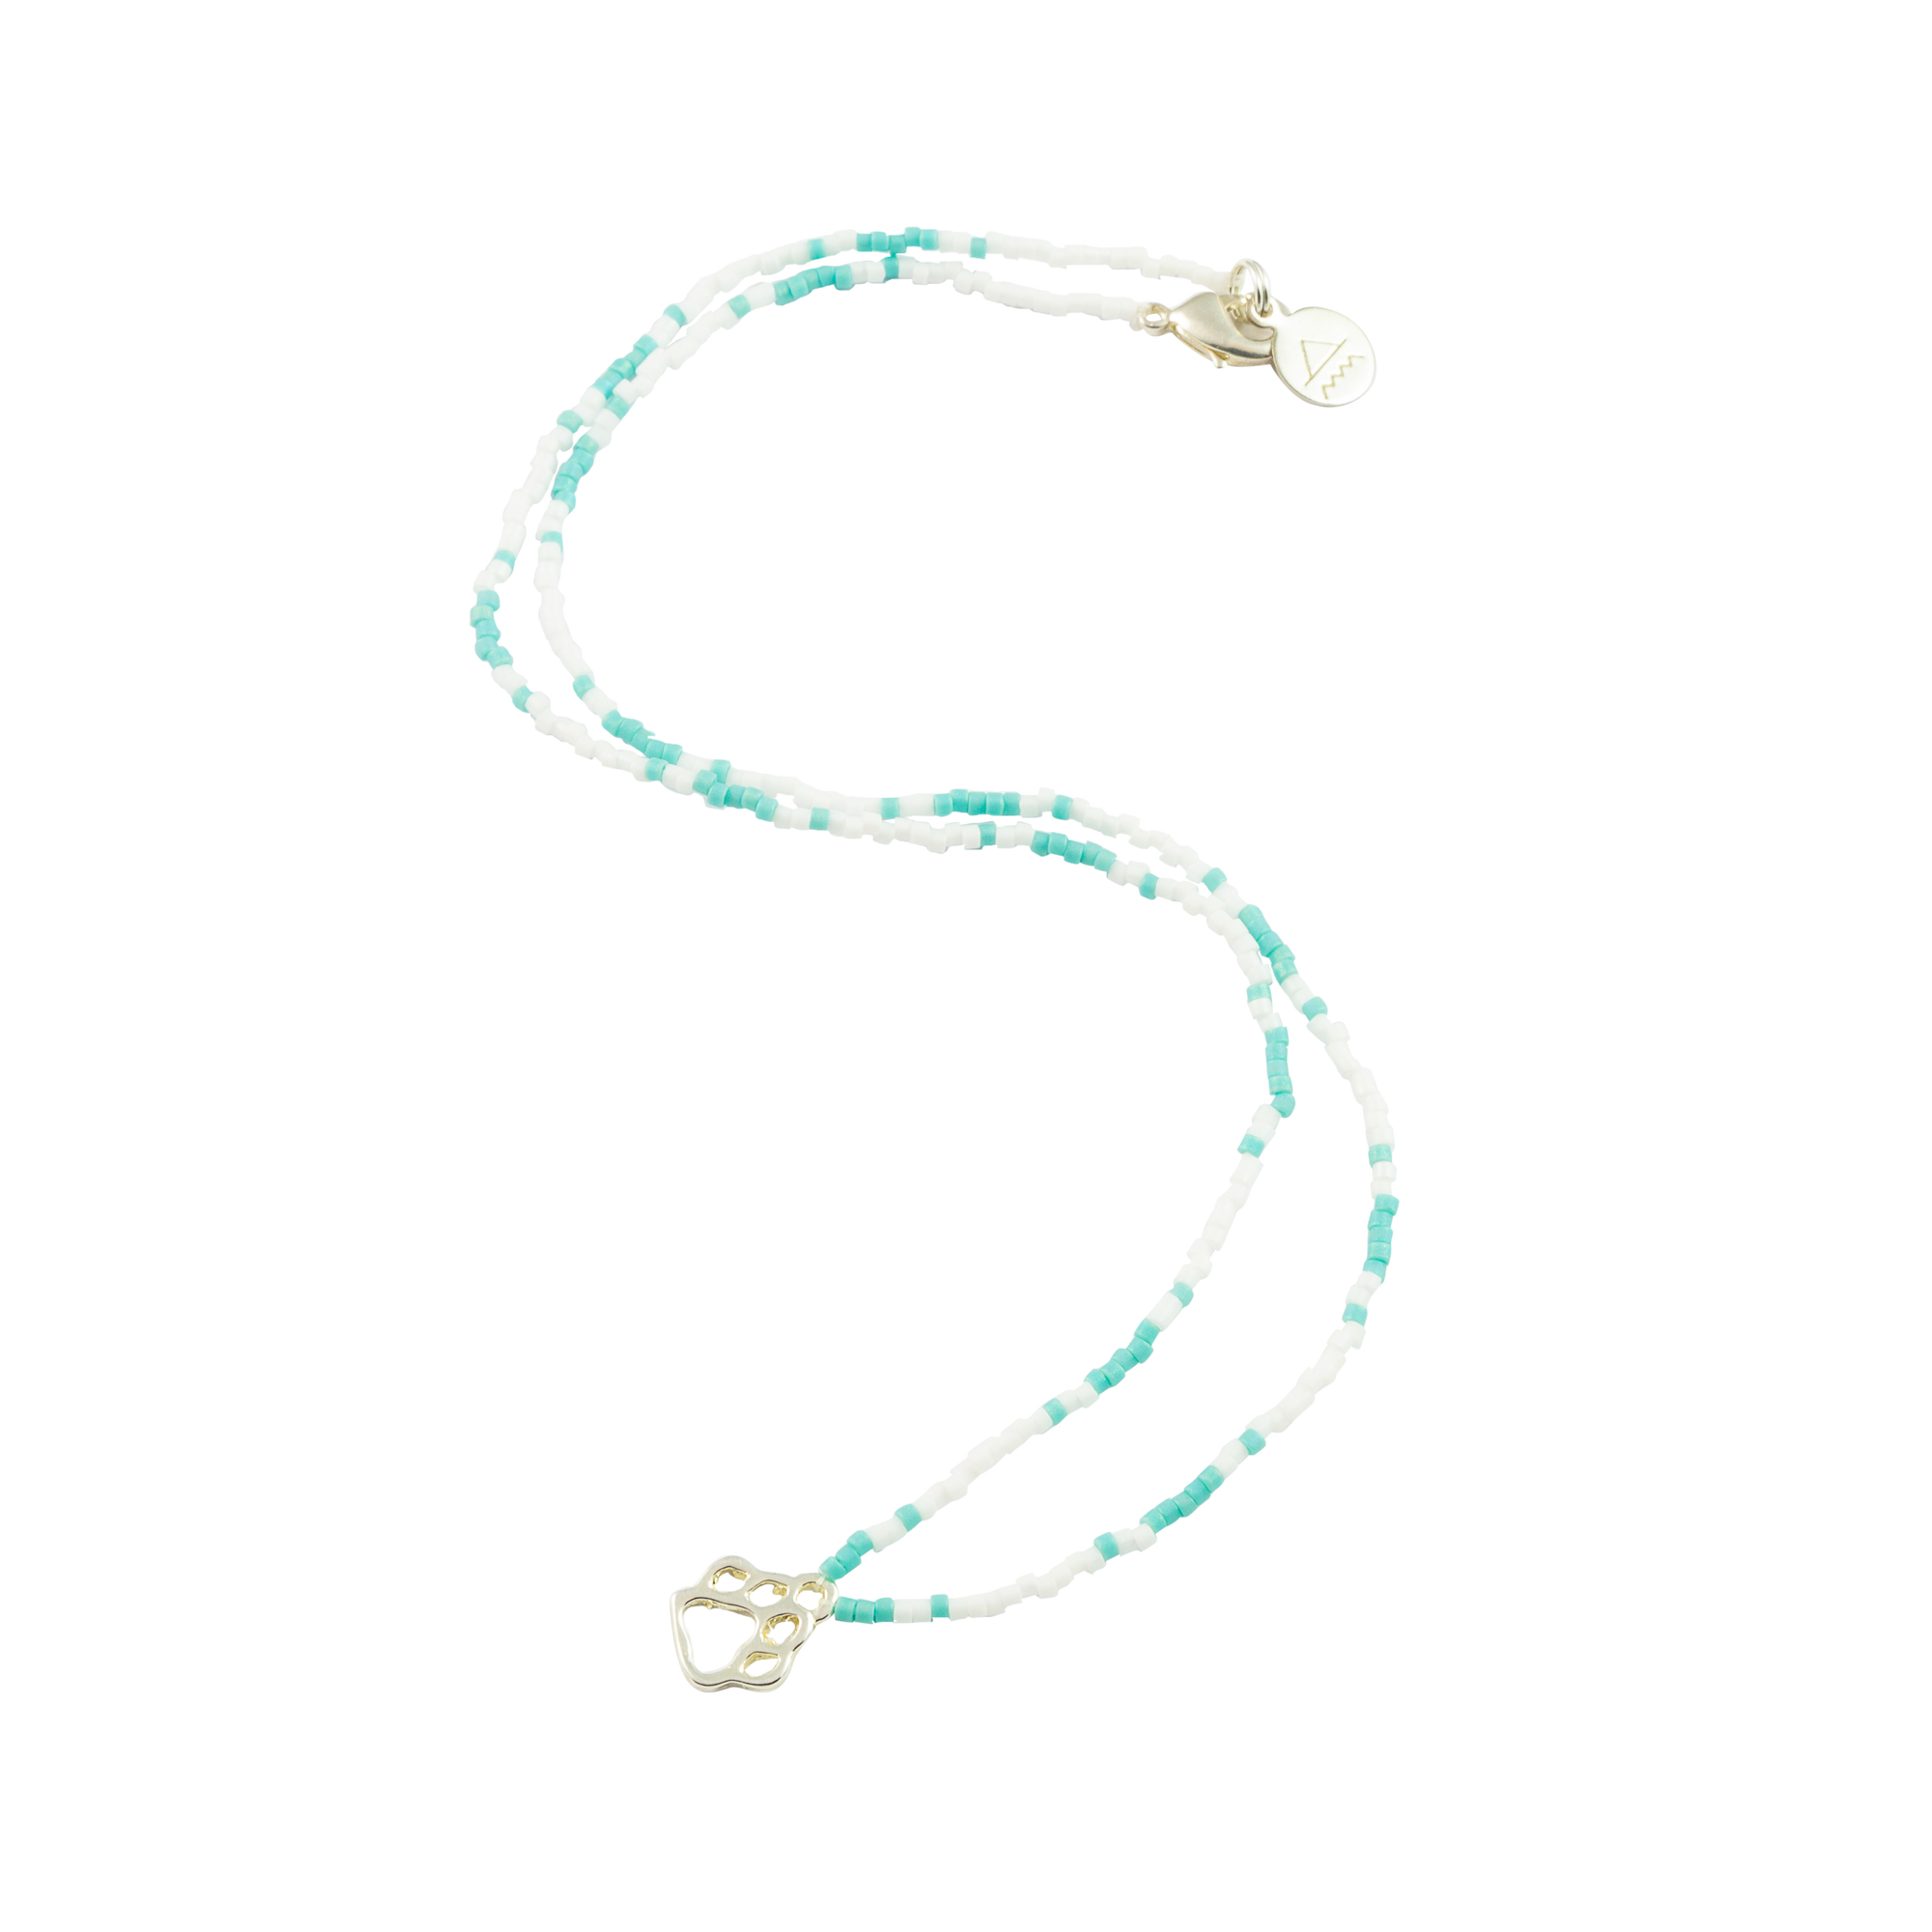 White & Teal Dog Paw Tiny Charm Necklace in Silver